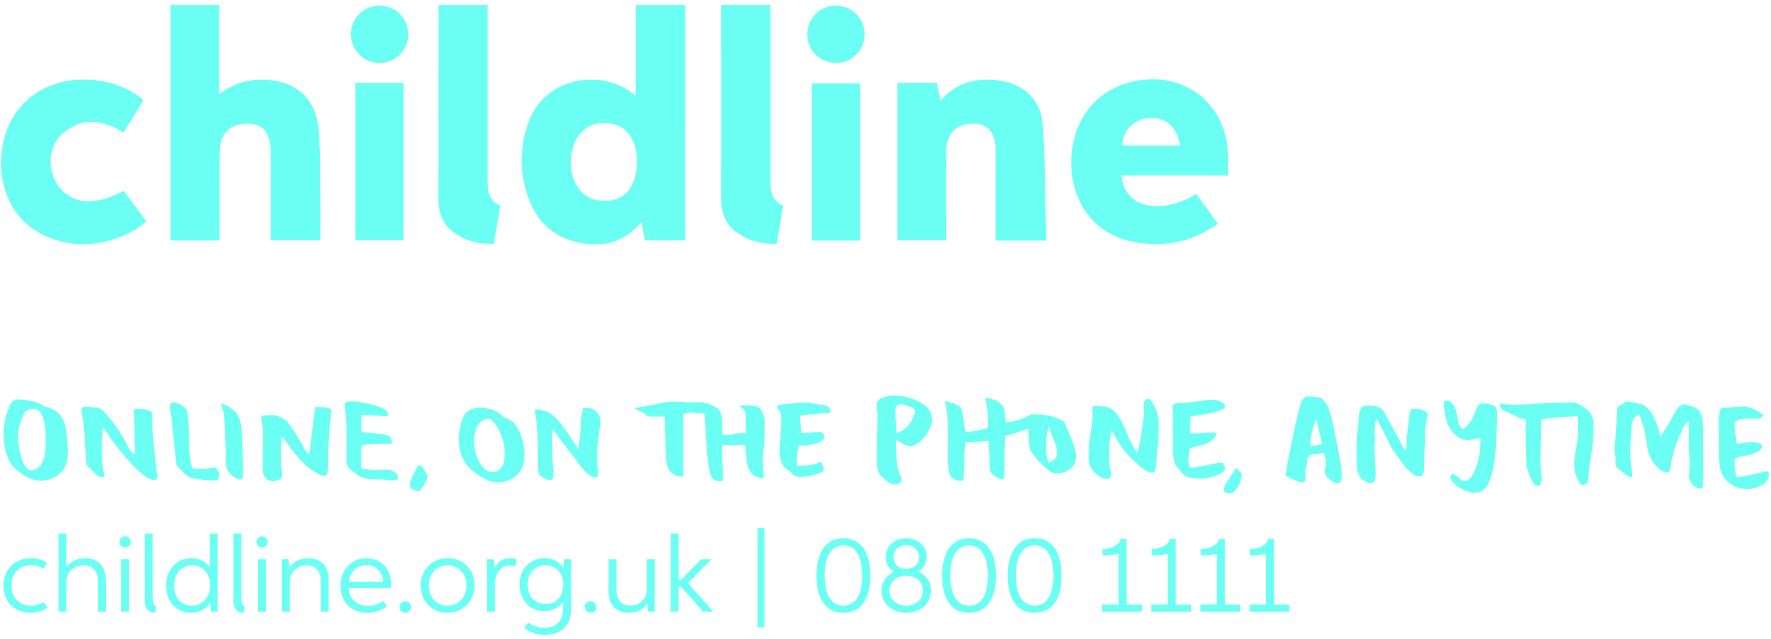 Families can contact Childline for help and advice